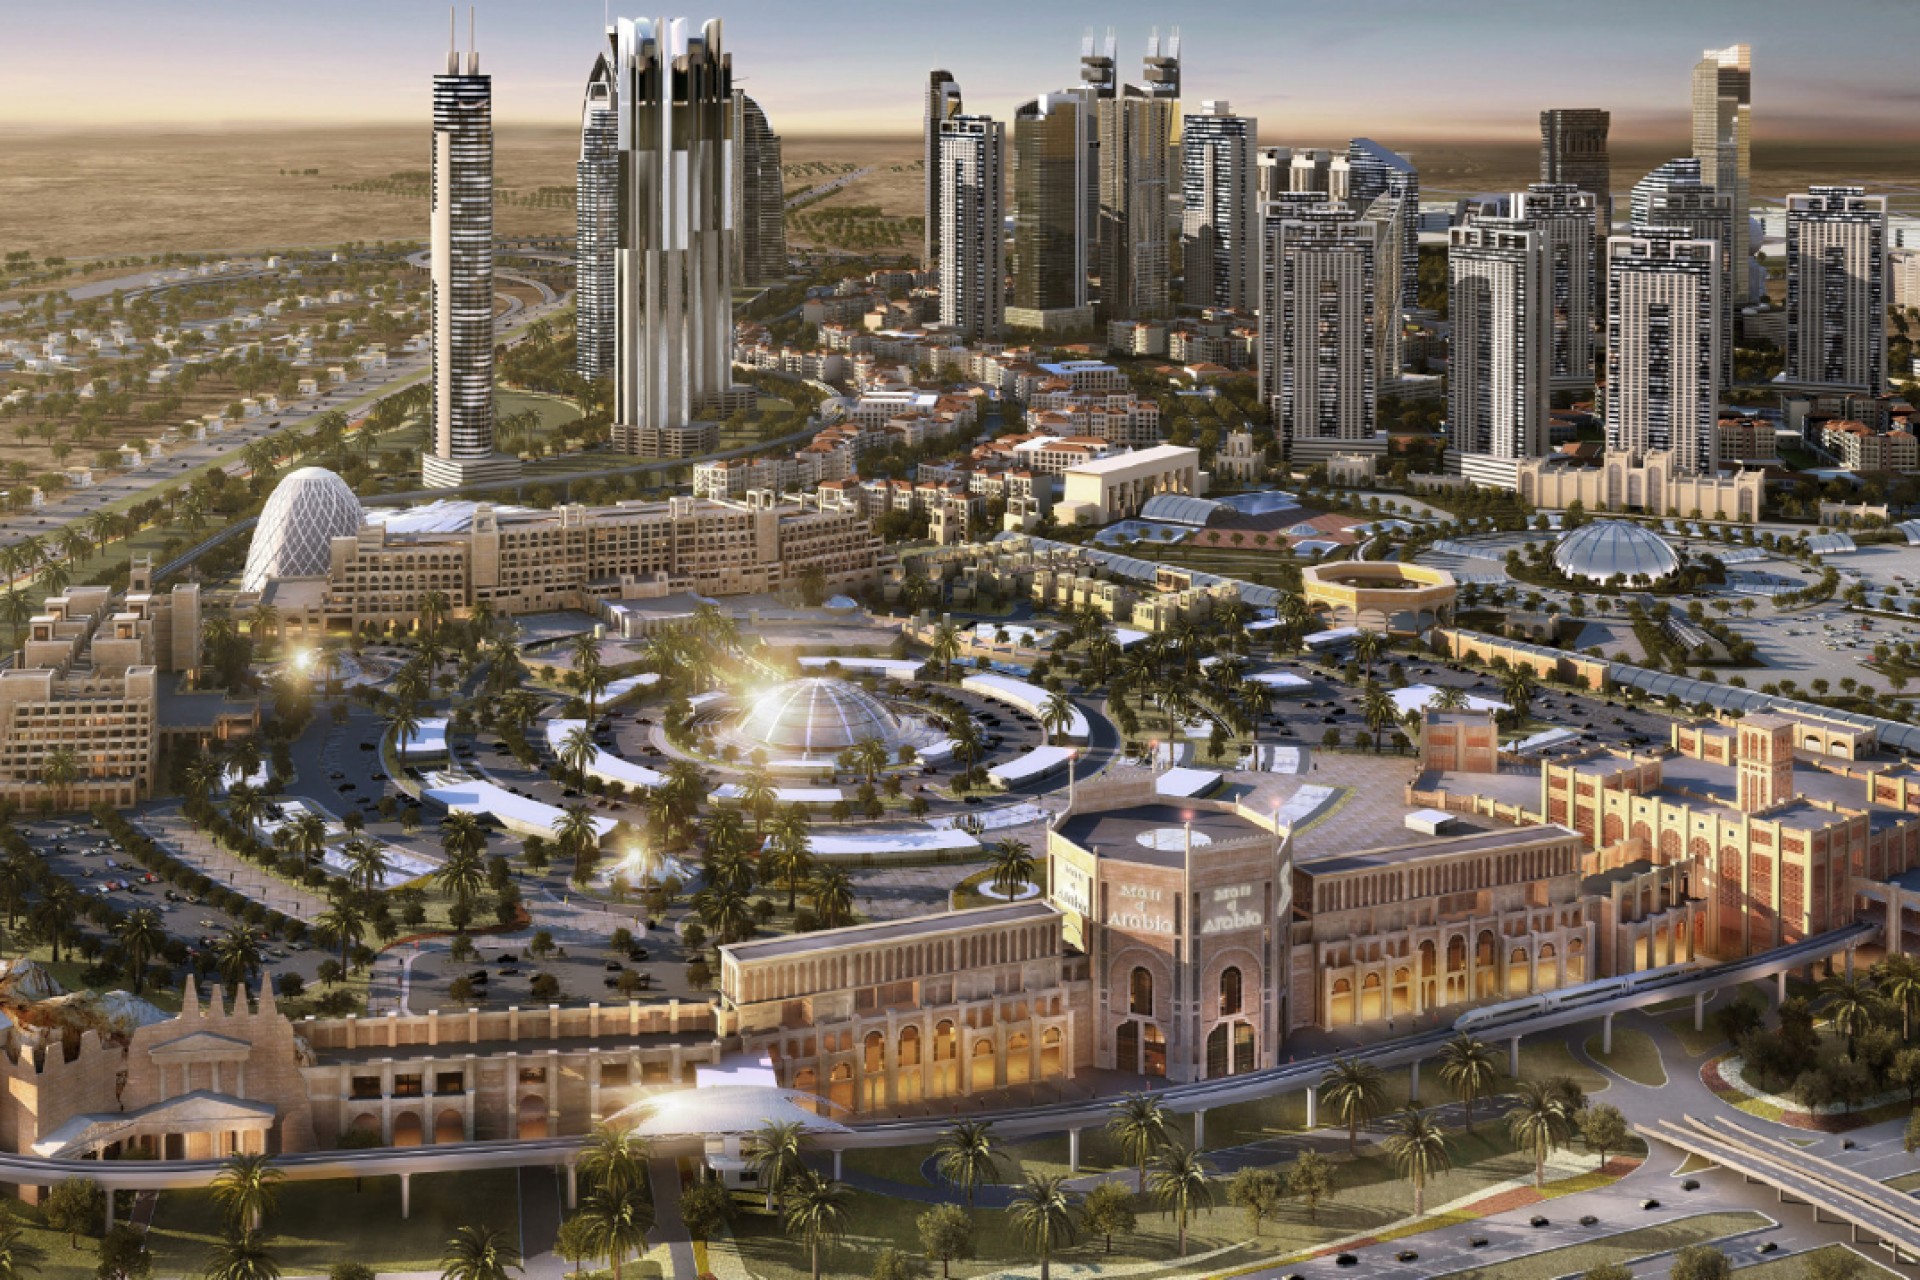  New stunning project in Dubai with featuring studios, and 1 to 2-bedroom apartments